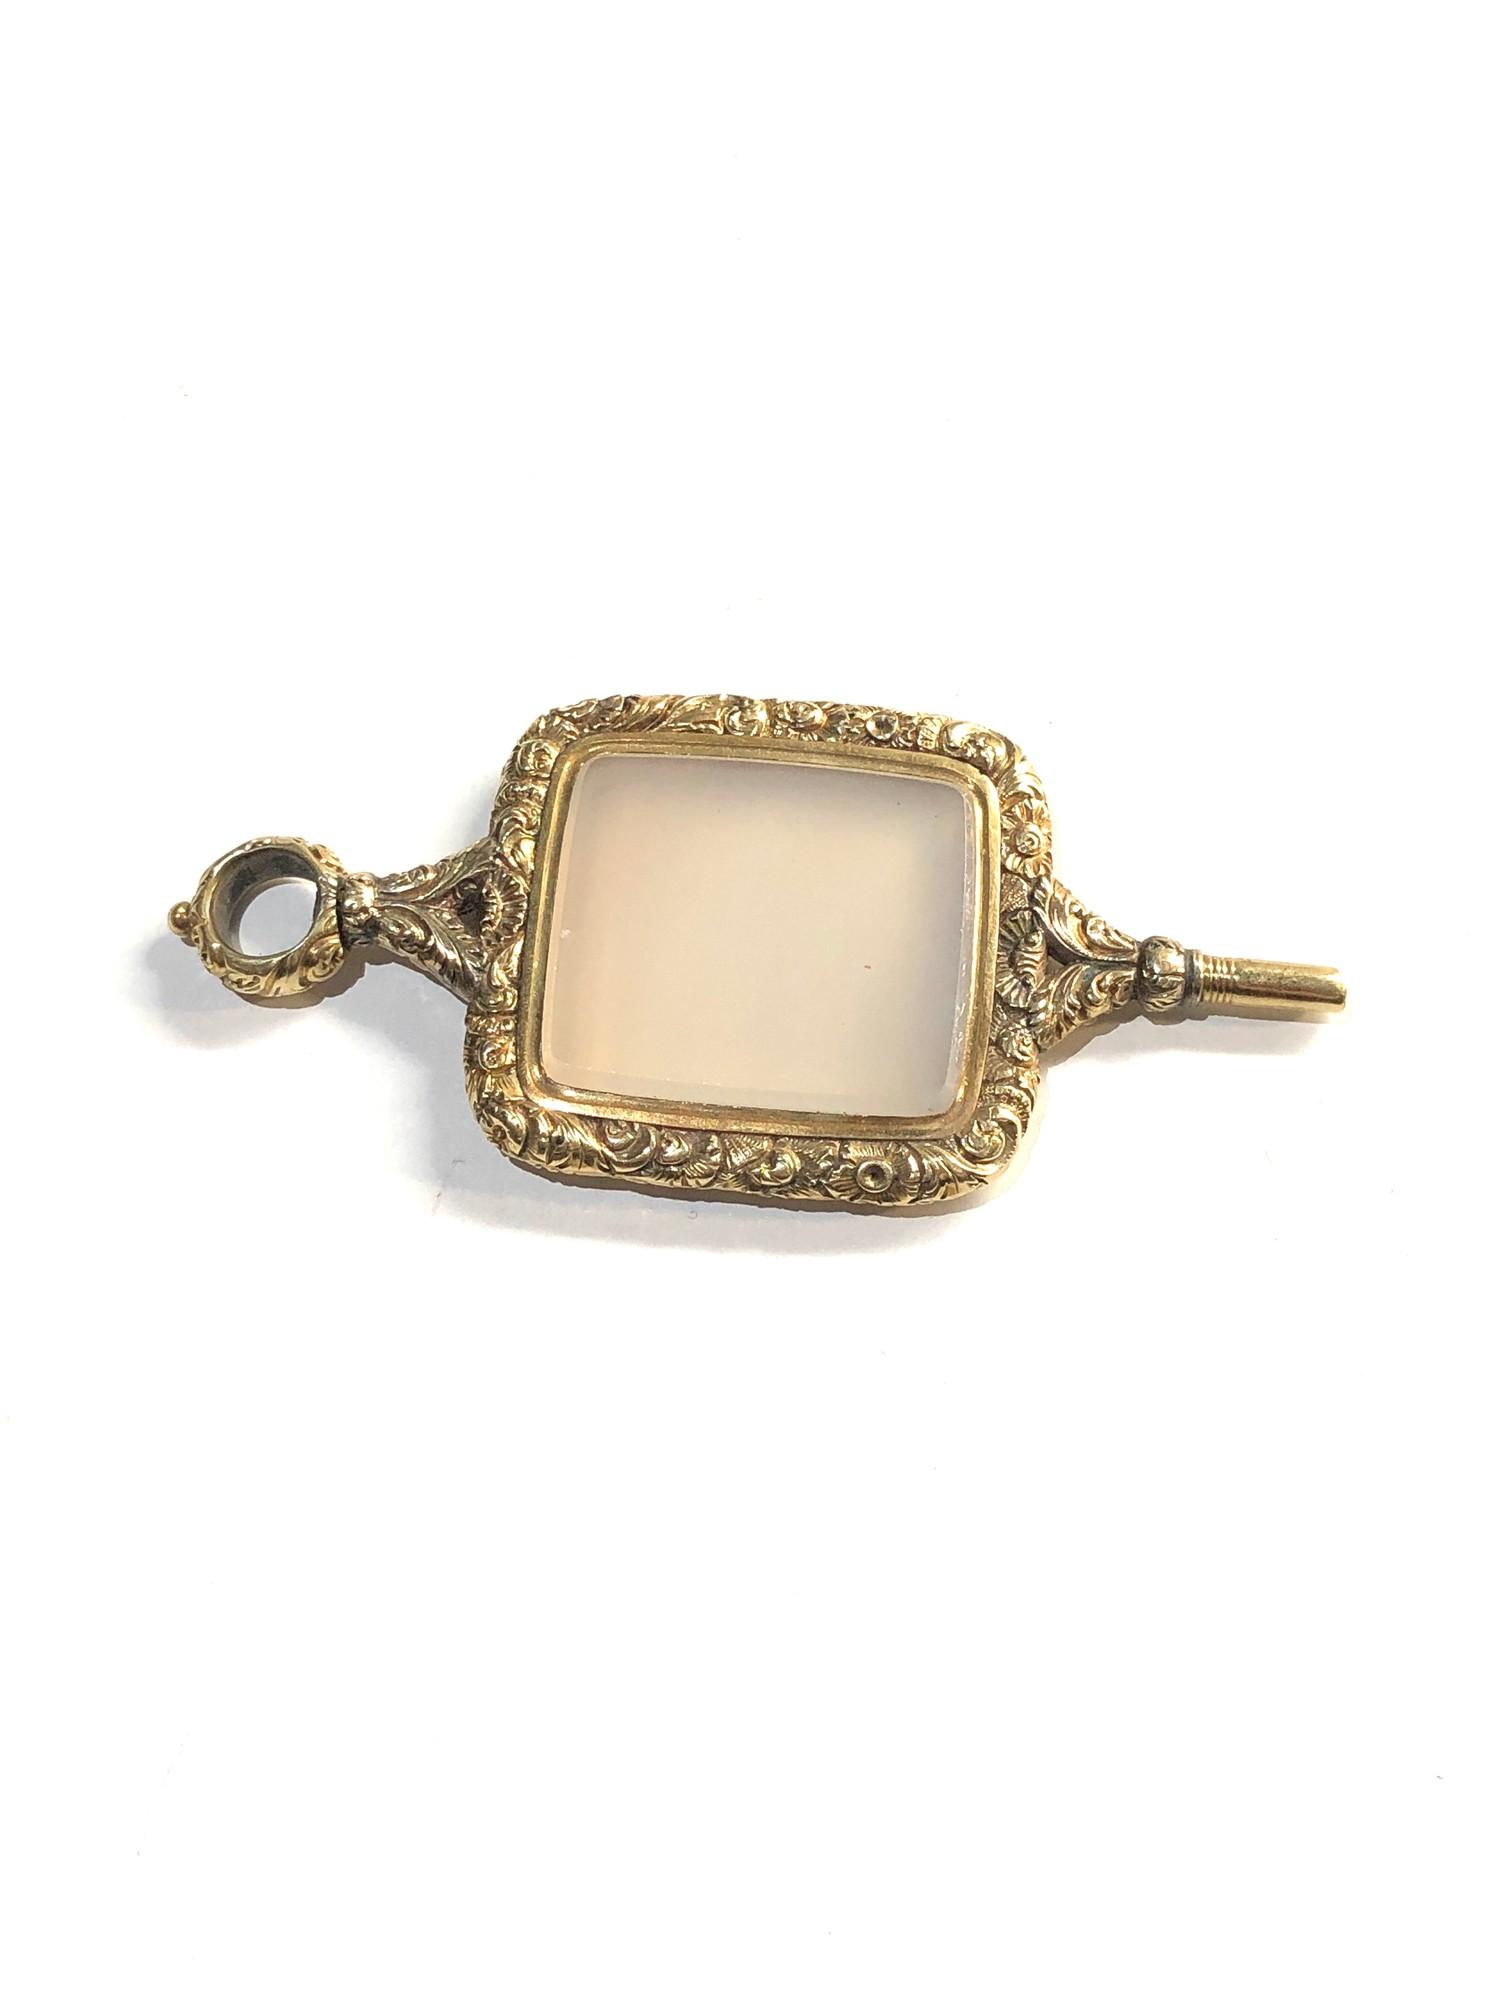 large gold agate set Georgian watch key, approximate weight 36.8, good overall condition - Bild 3 aus 3